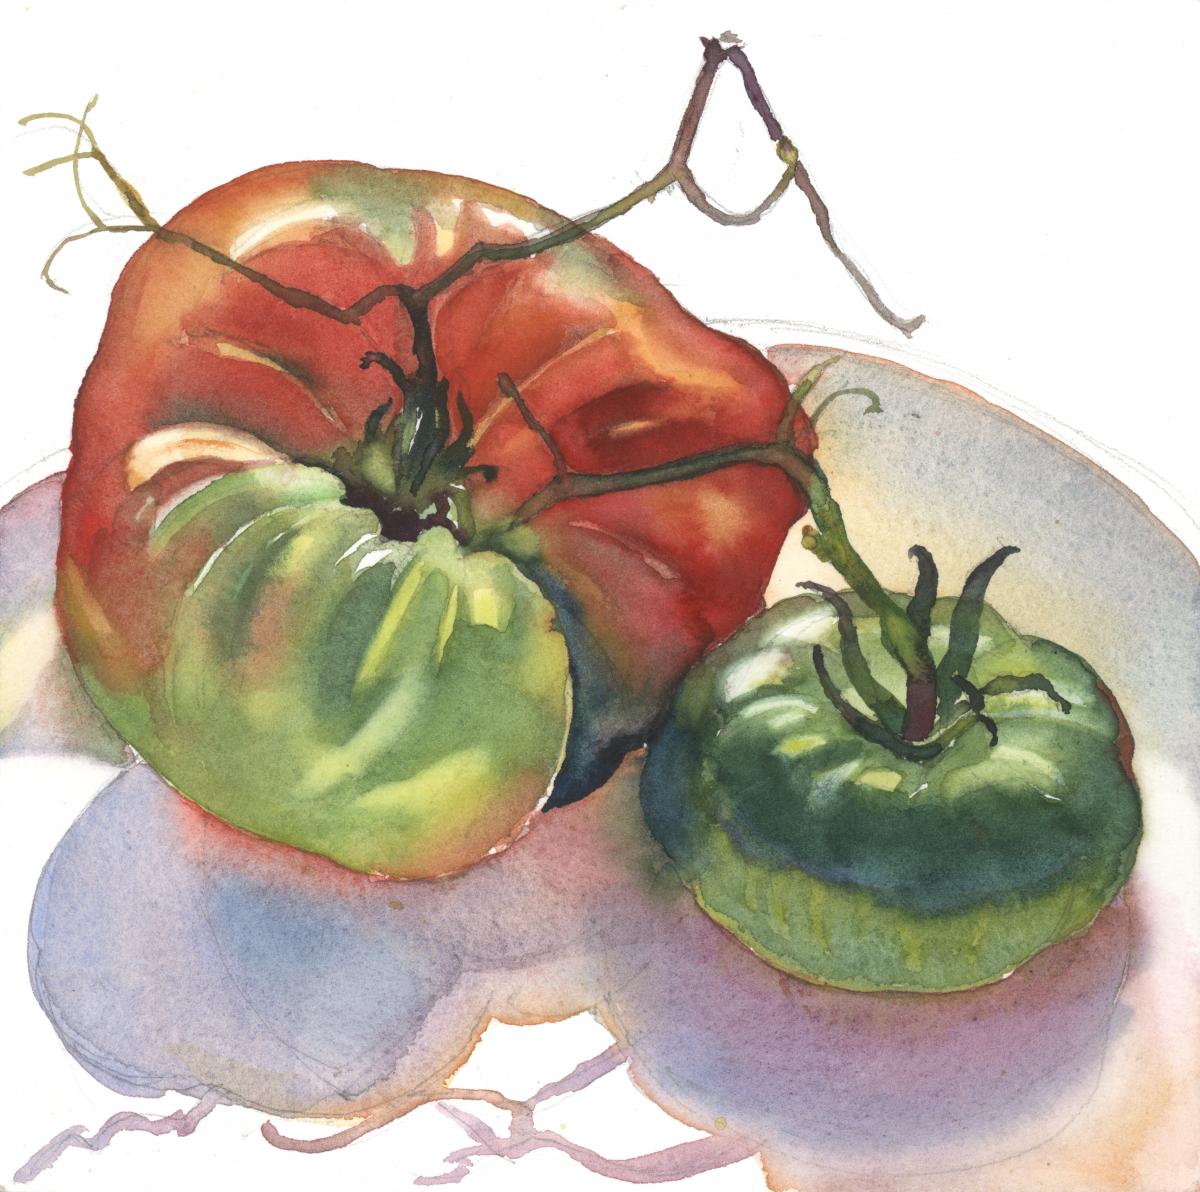 Season's Last Tomatoes - watercolor still life painting by Frank Costantino